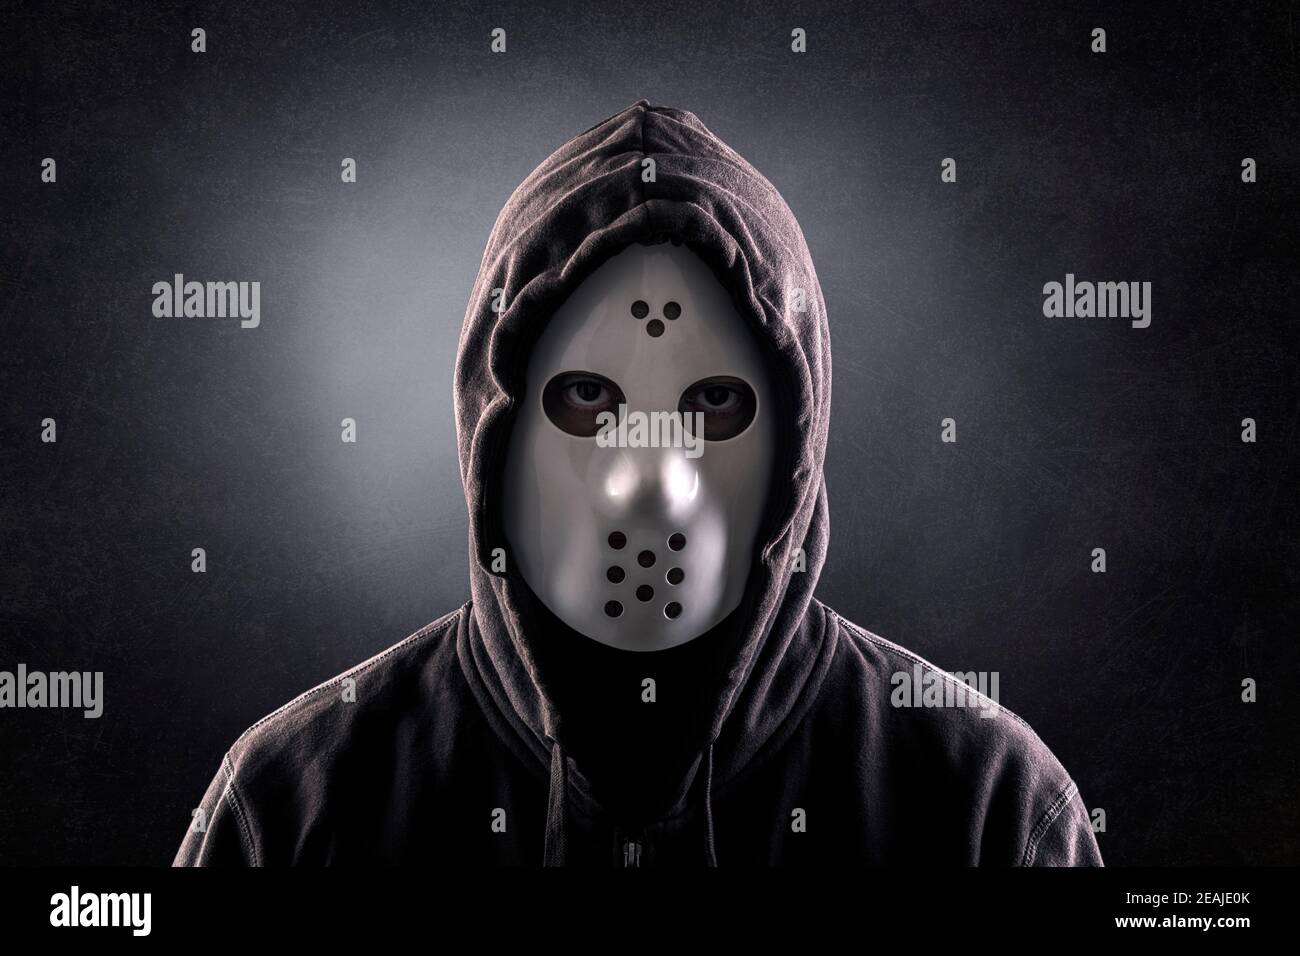 Hooded maniac or criminal in mask Stock Photo